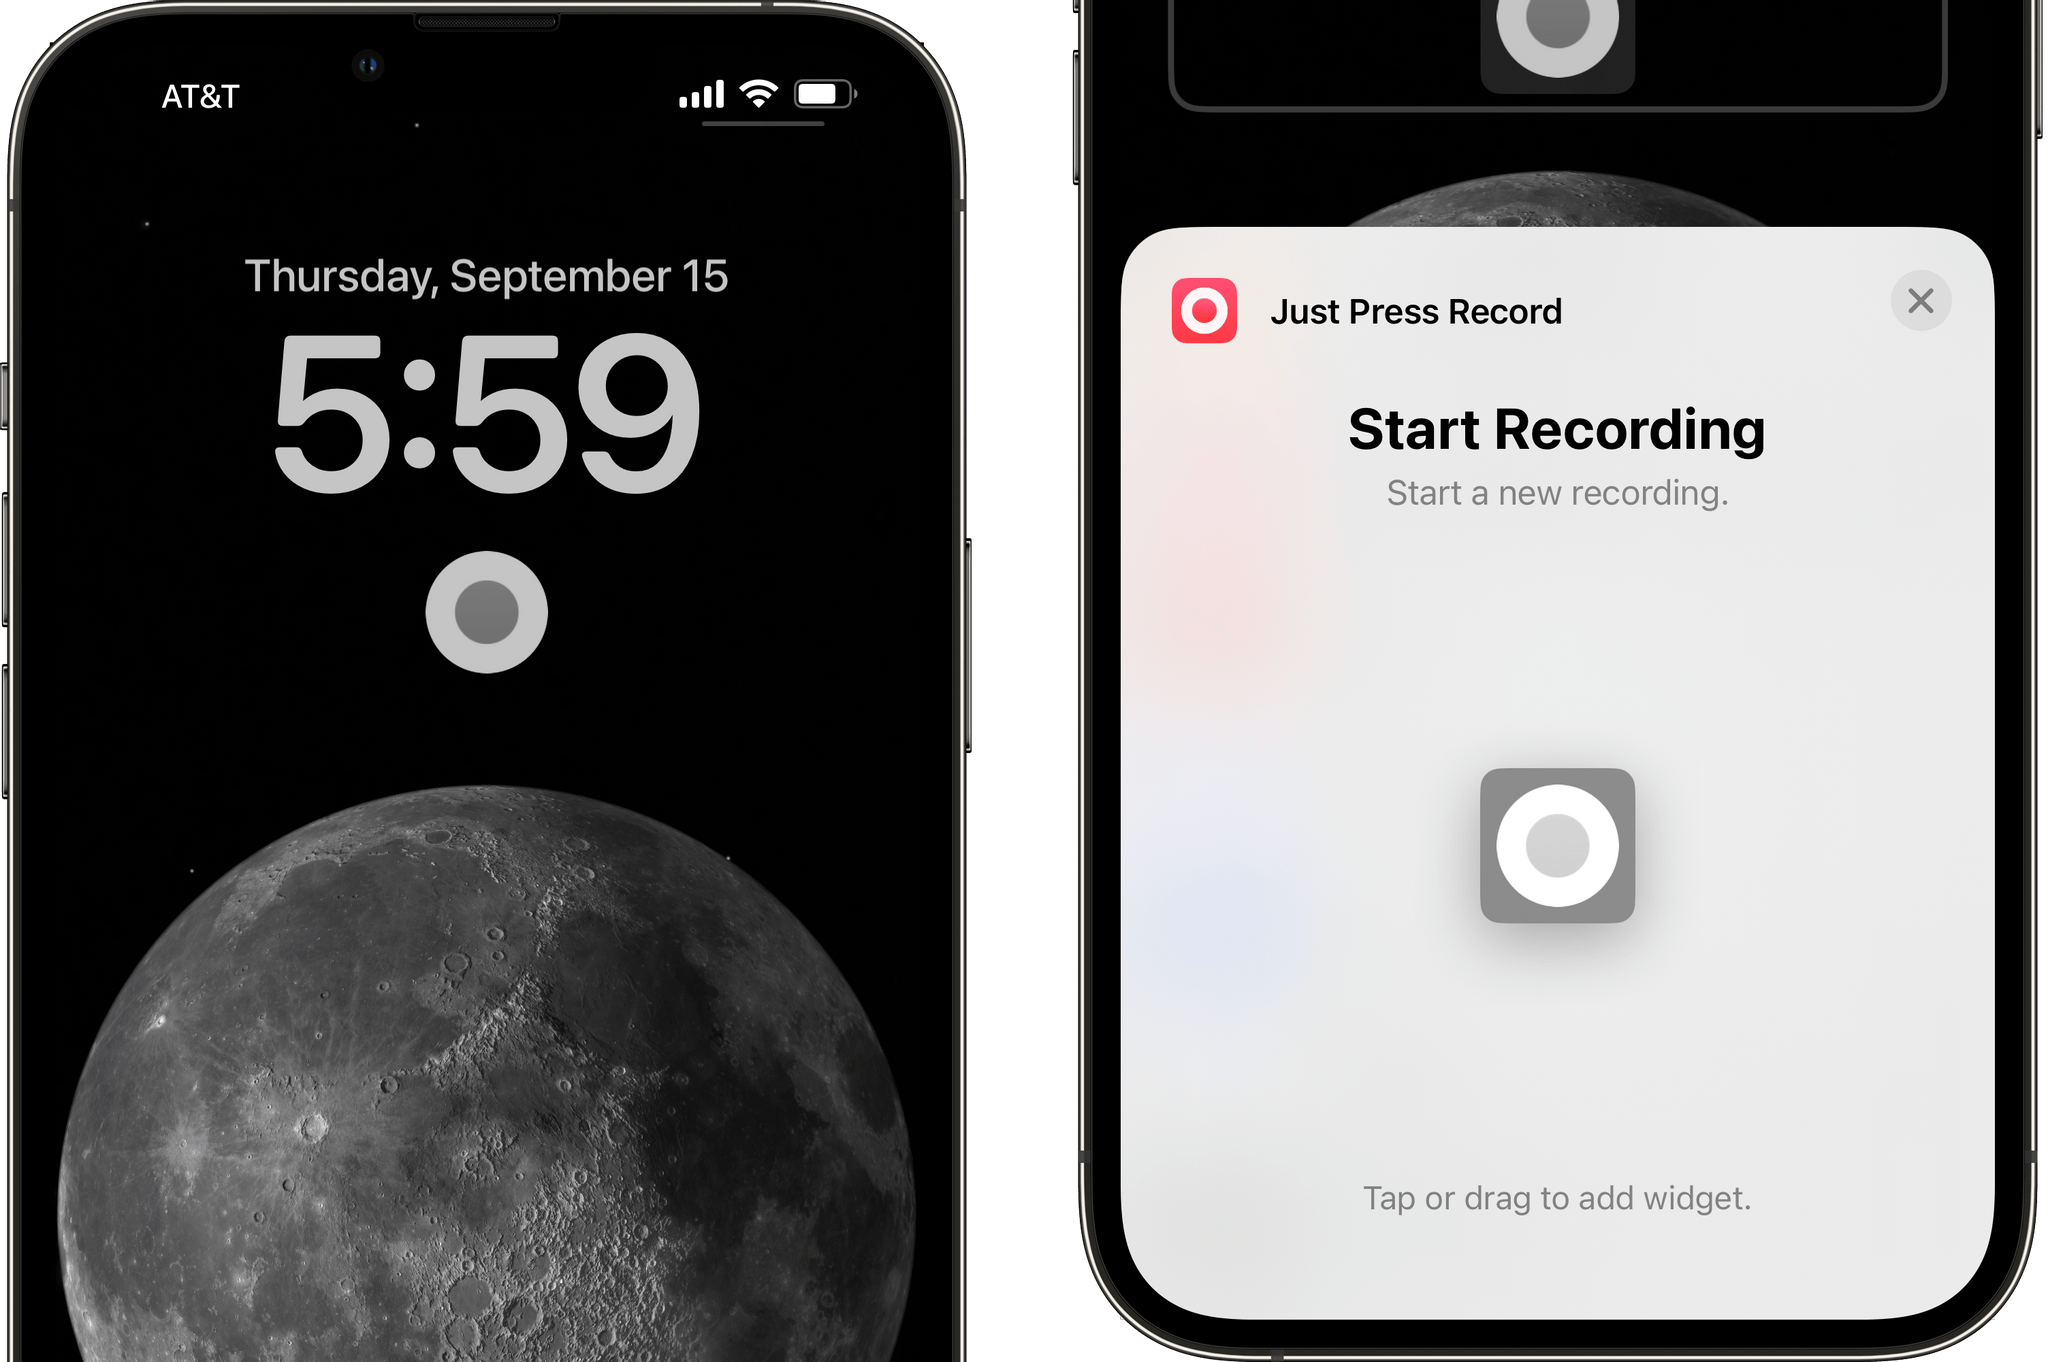 Just Press Record's widget for starting a recording.